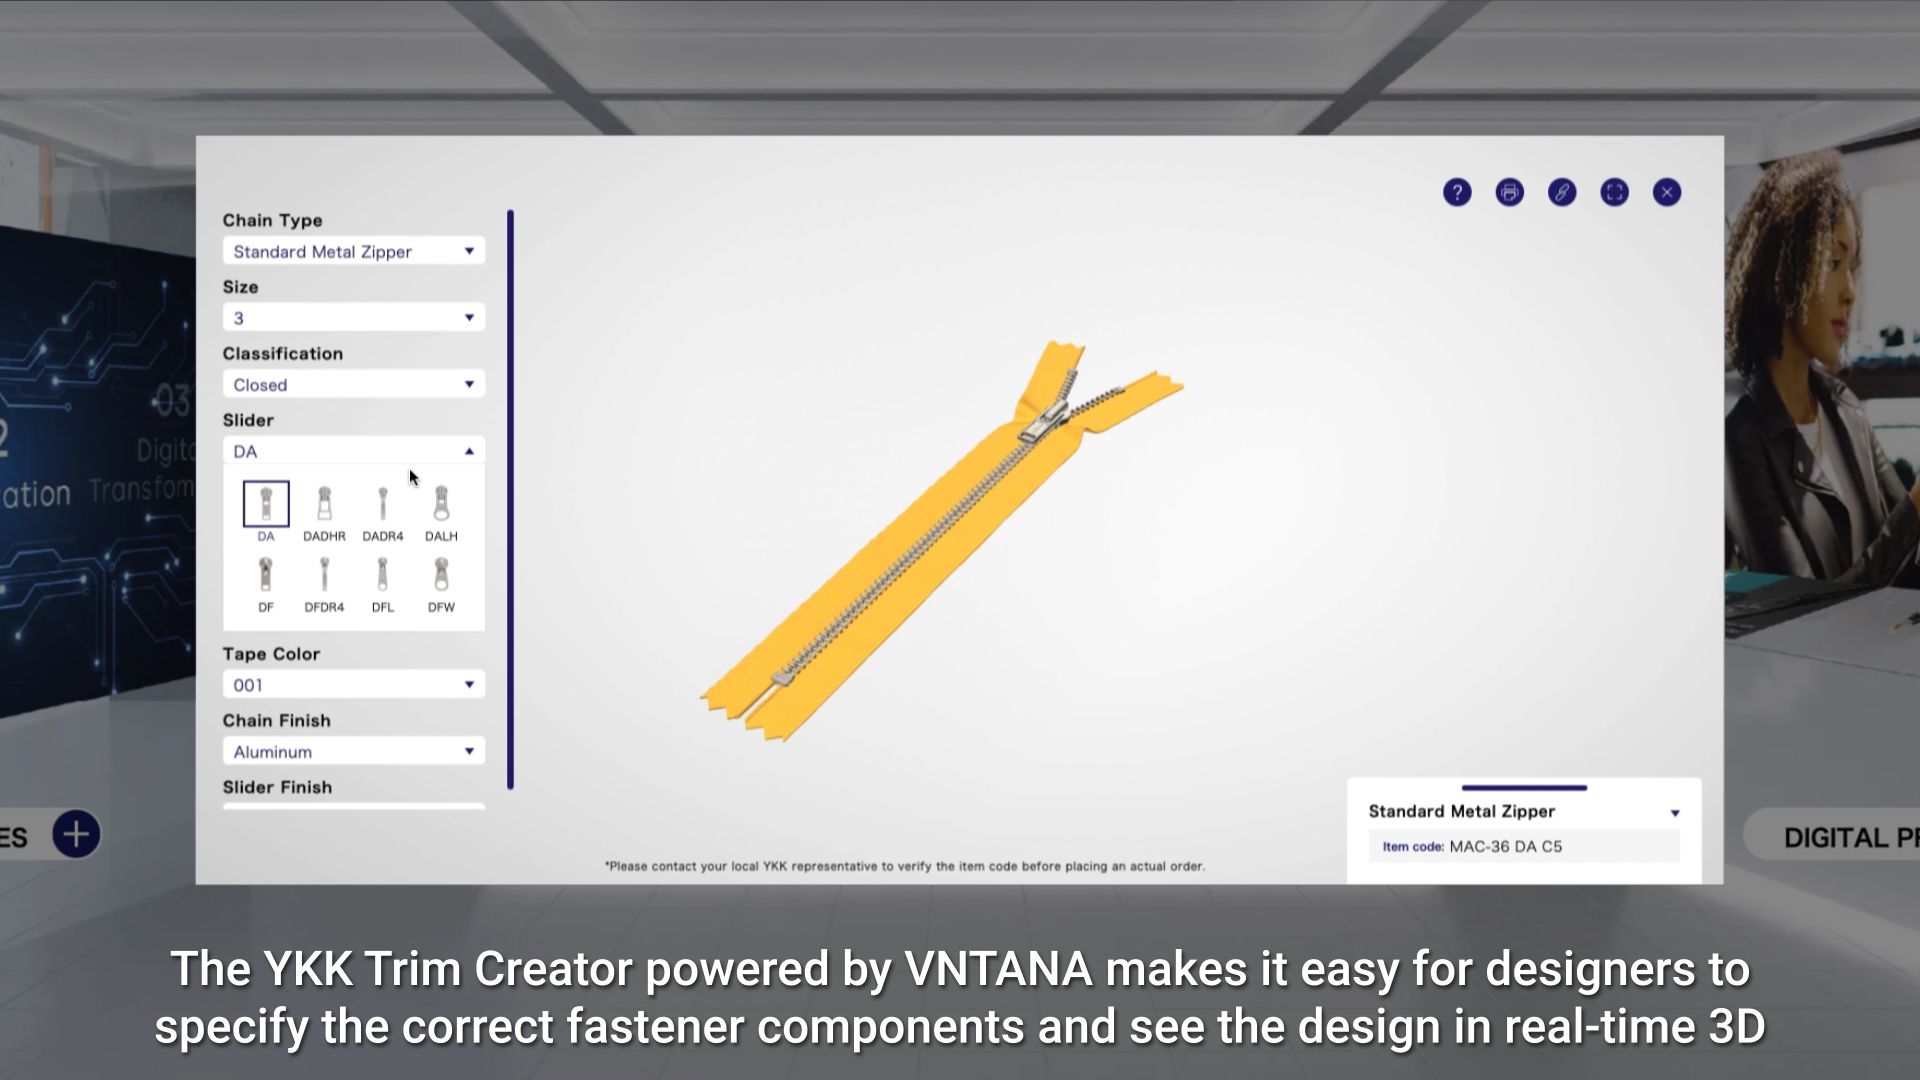 YKK Launches First Ever 3D Configurator for Custom Trim Sales